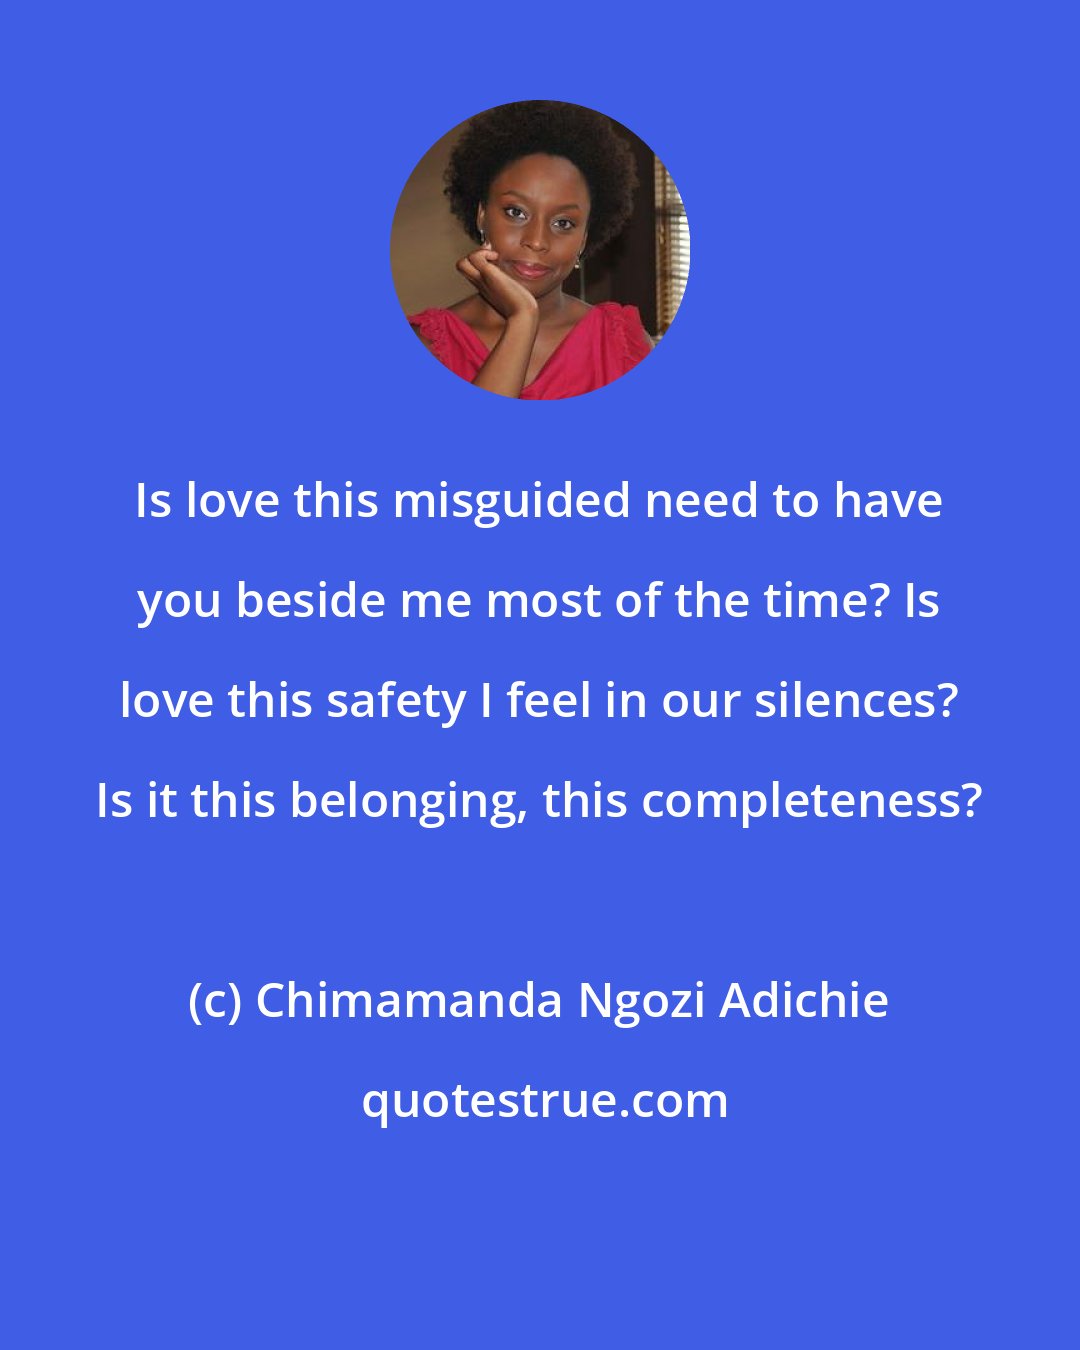 Chimamanda Ngozi Adichie: Is love this misguided need to have you beside me most of the time? Is love this safety I feel in our silences? Is it this belonging, this completeness?